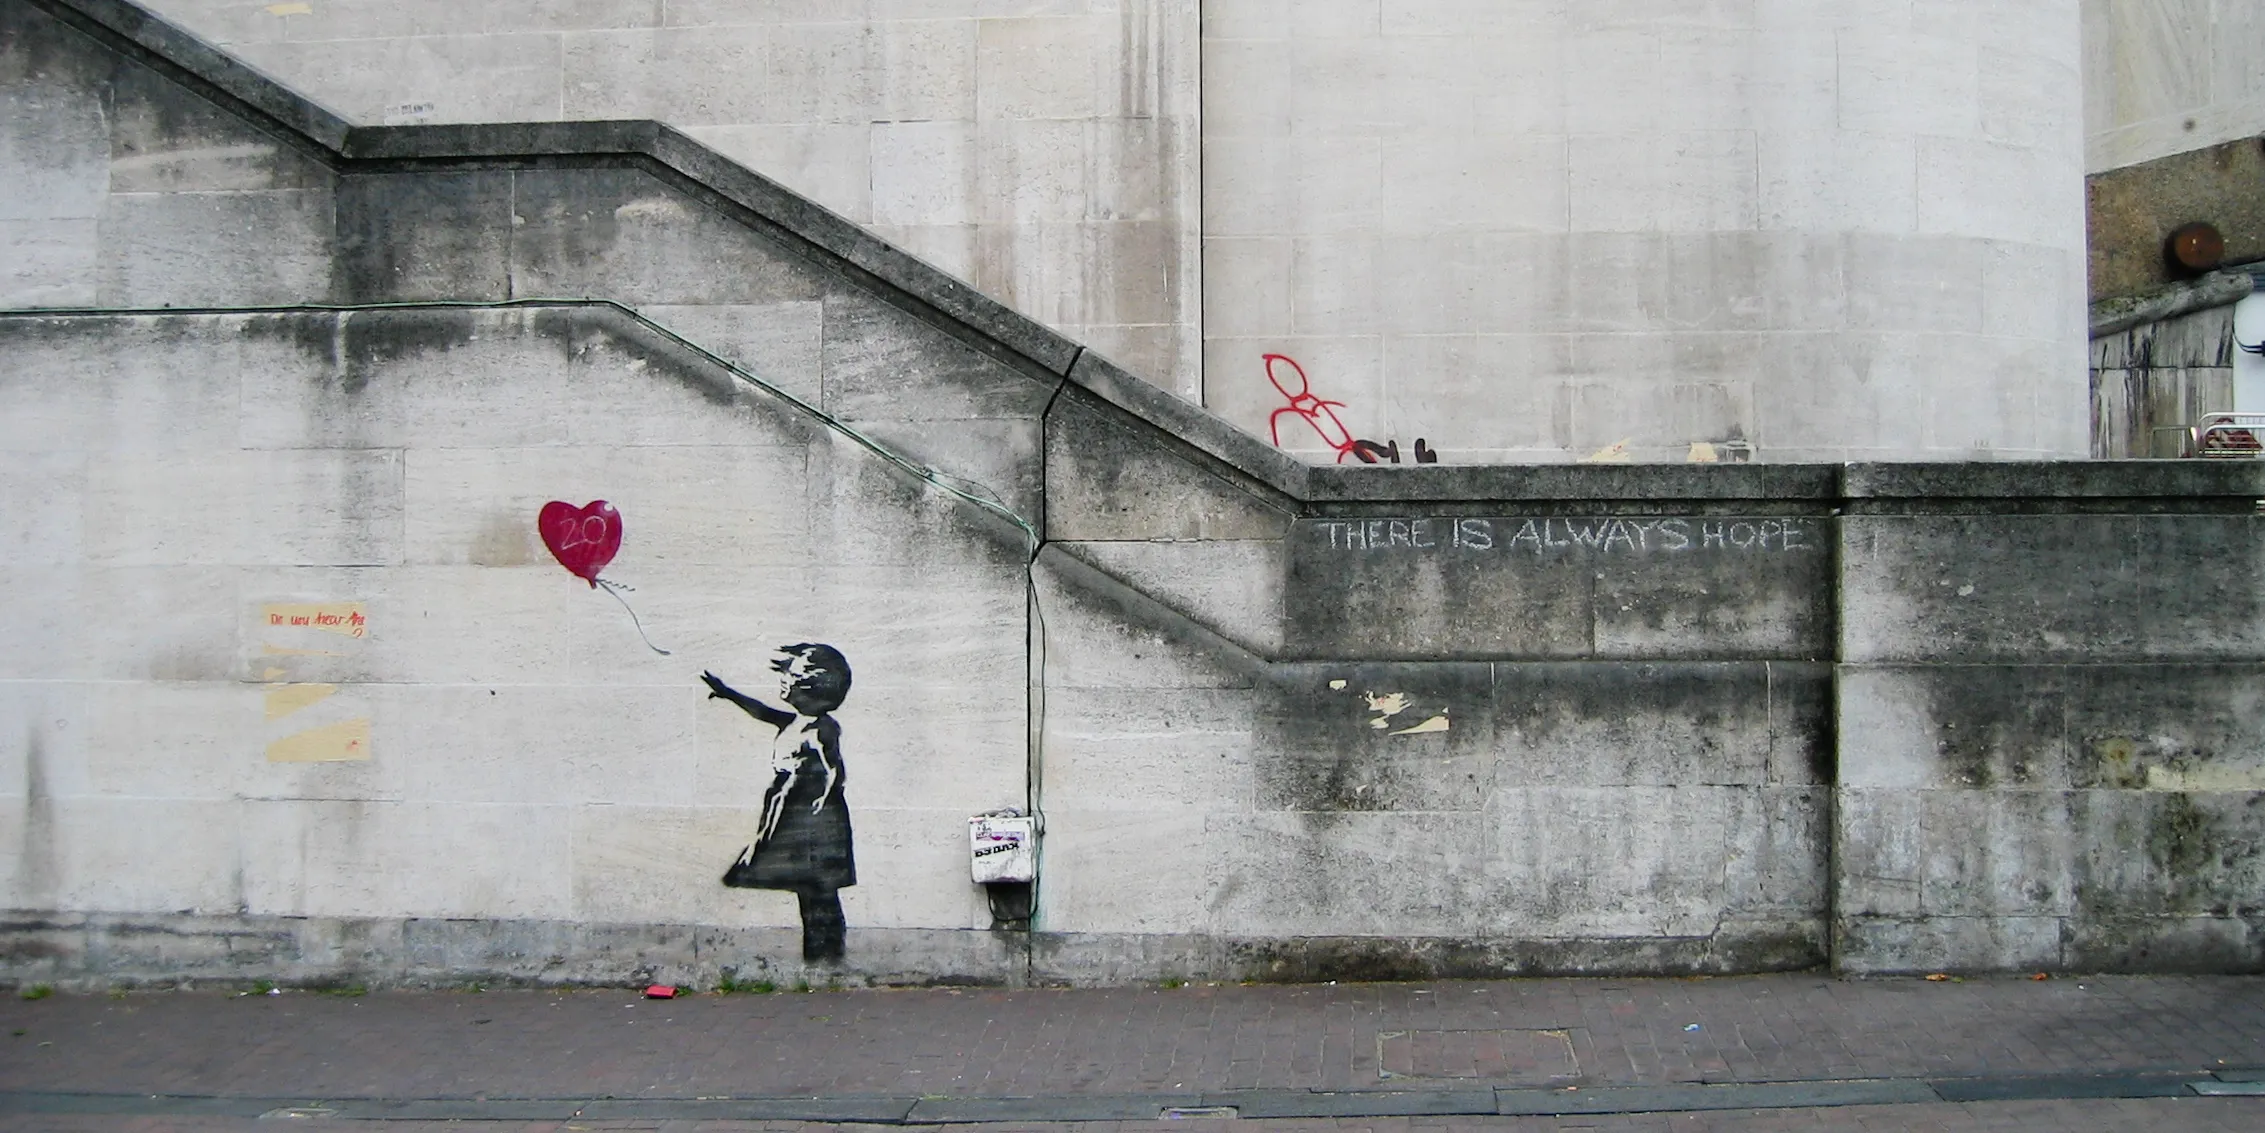 Street art graffiti from contemporary artist - Banksy. Name of the art - girl with balloon.